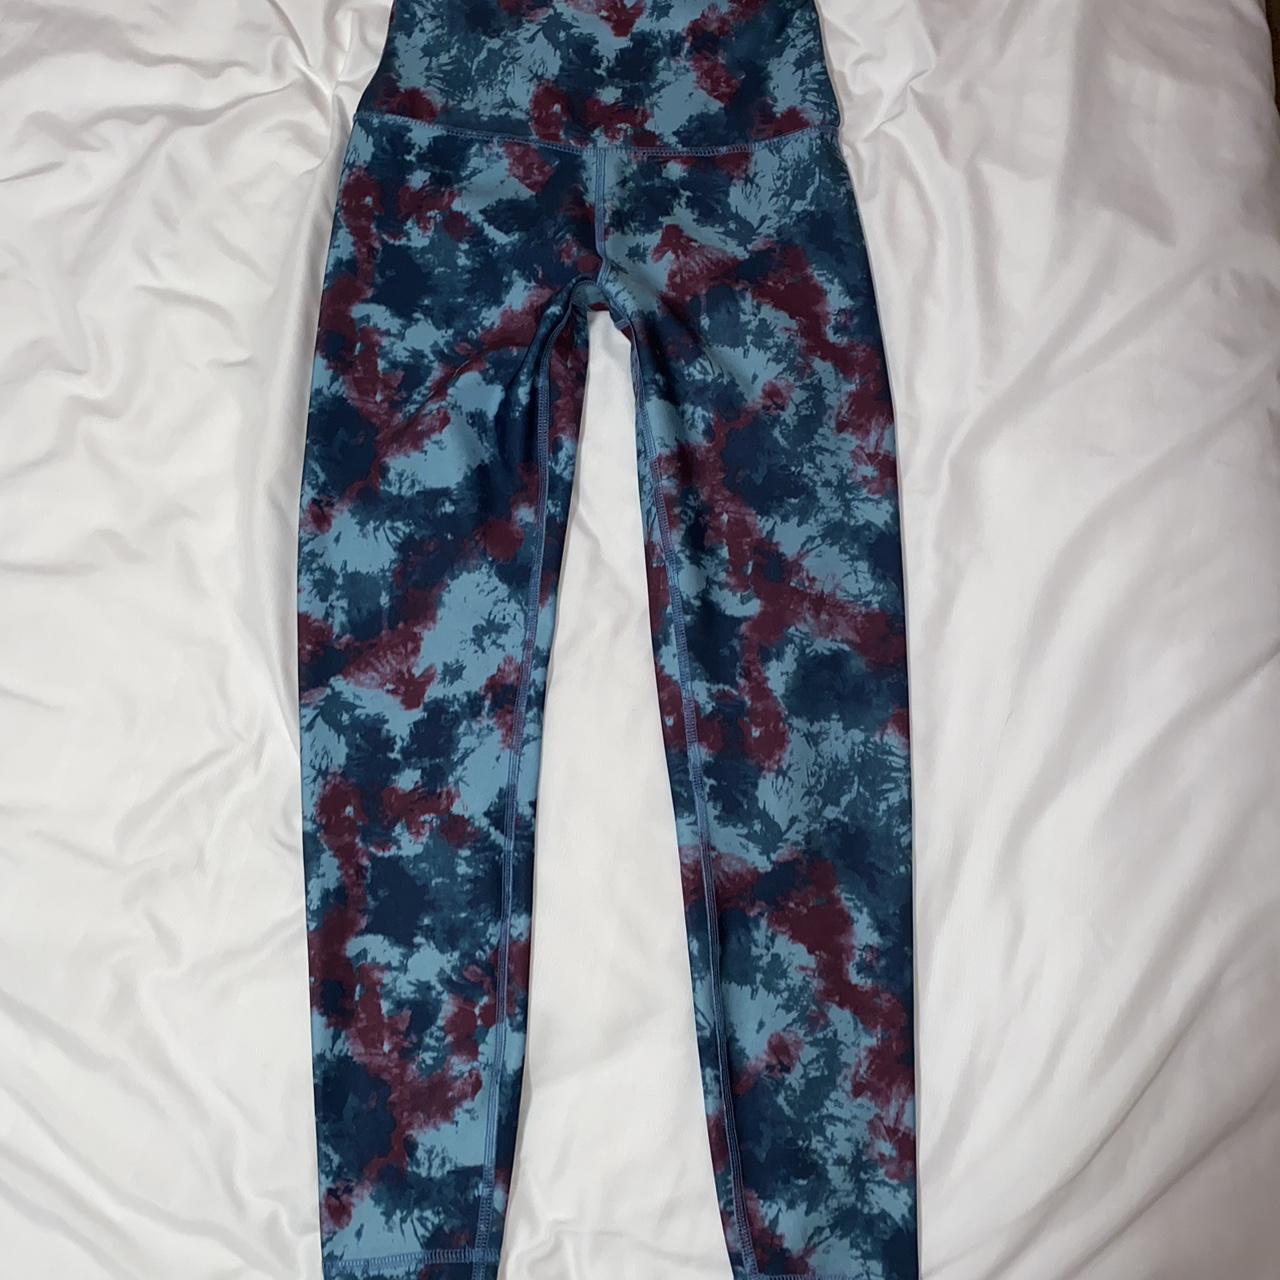 Small reversible leggings with unique pattern, only - Depop